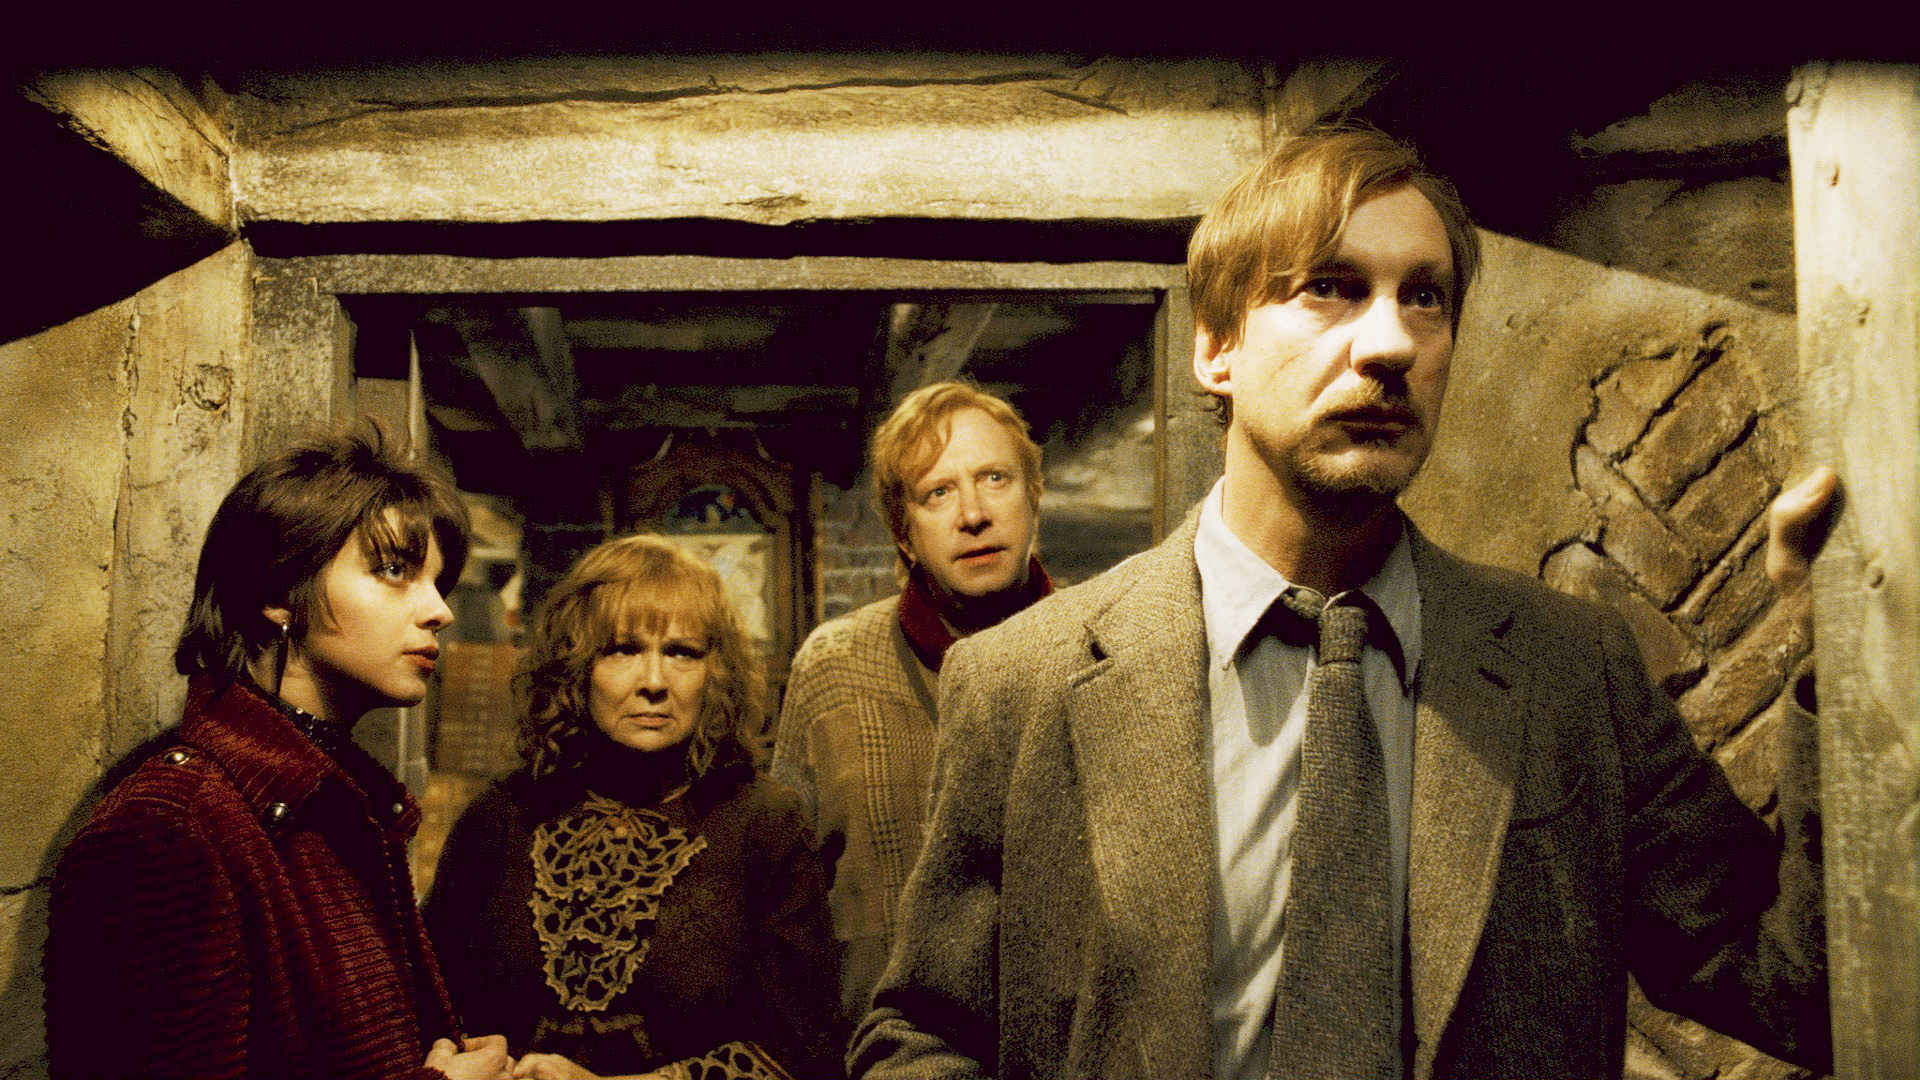 Natalia Tena, Julie Walters, Mark Williams and David Thewlis in Warner Bros Pictures' Harry Potter and the Half-Blood Prince (2009)